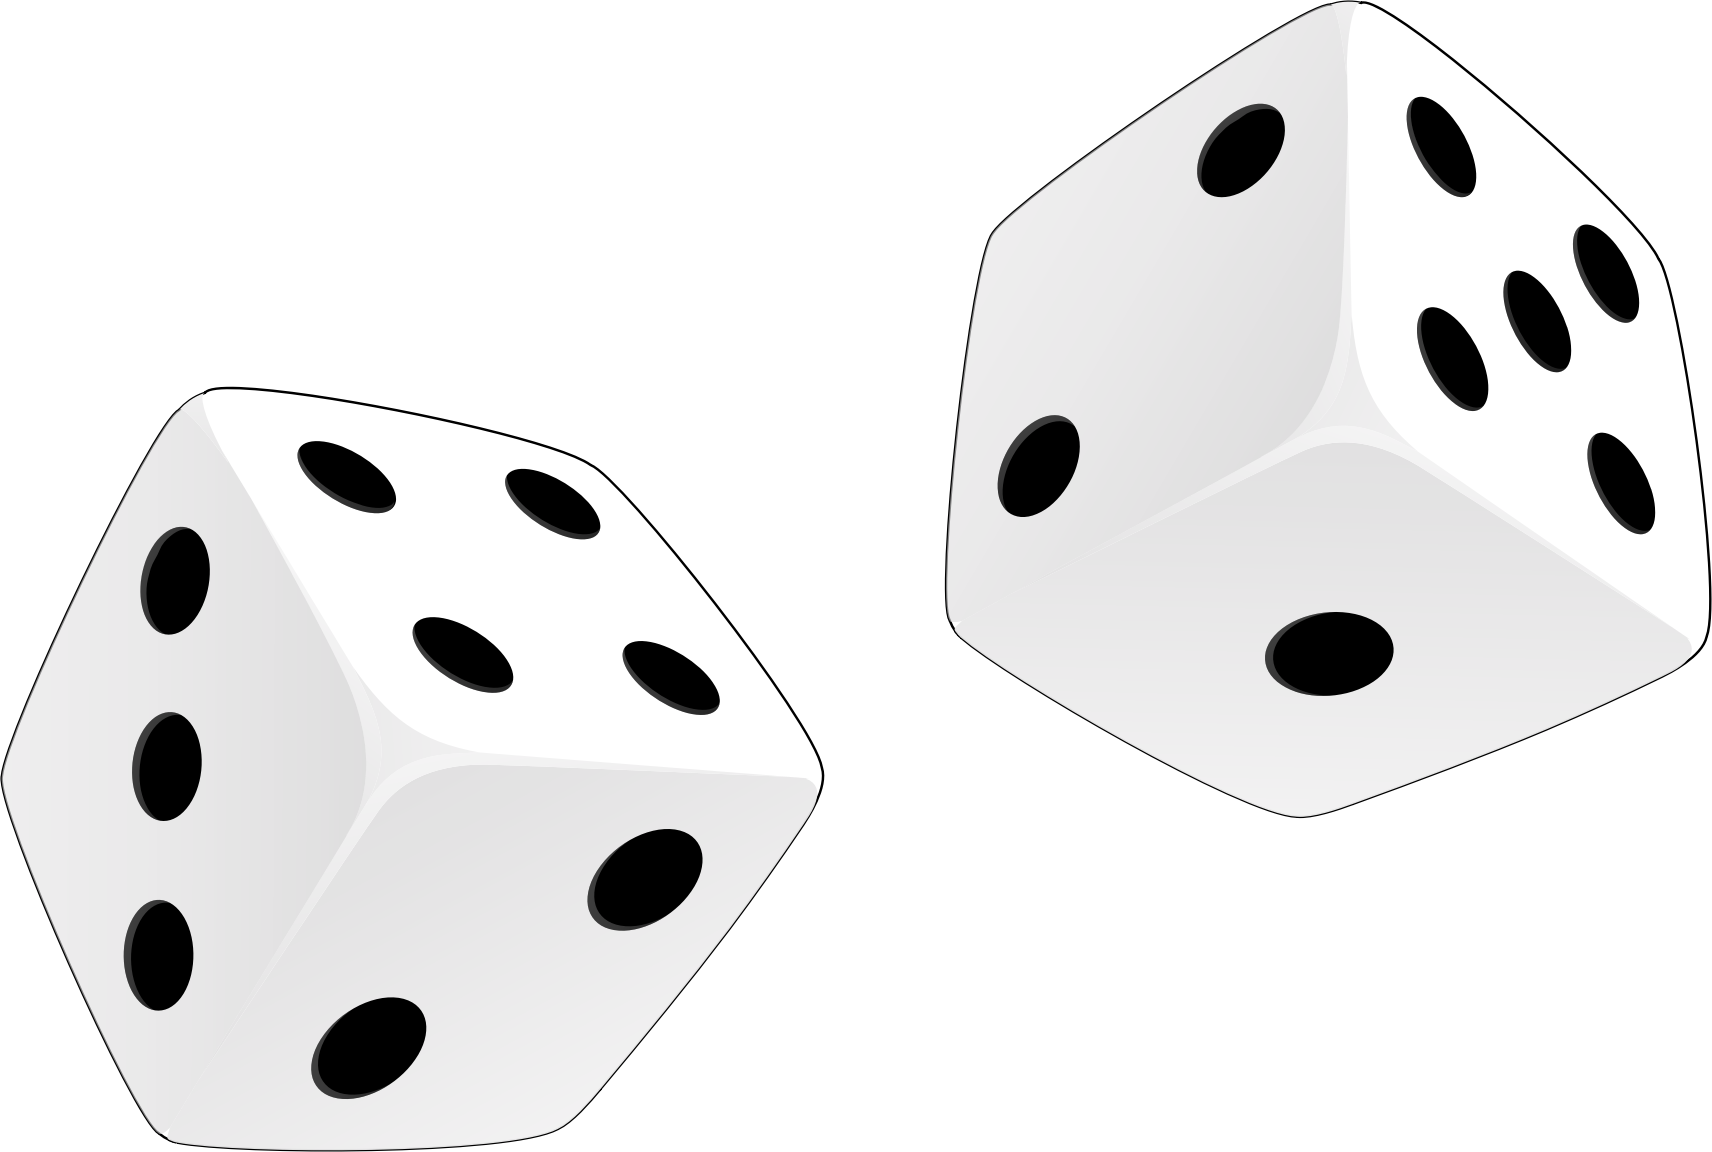 free clipart of dice - photo #39